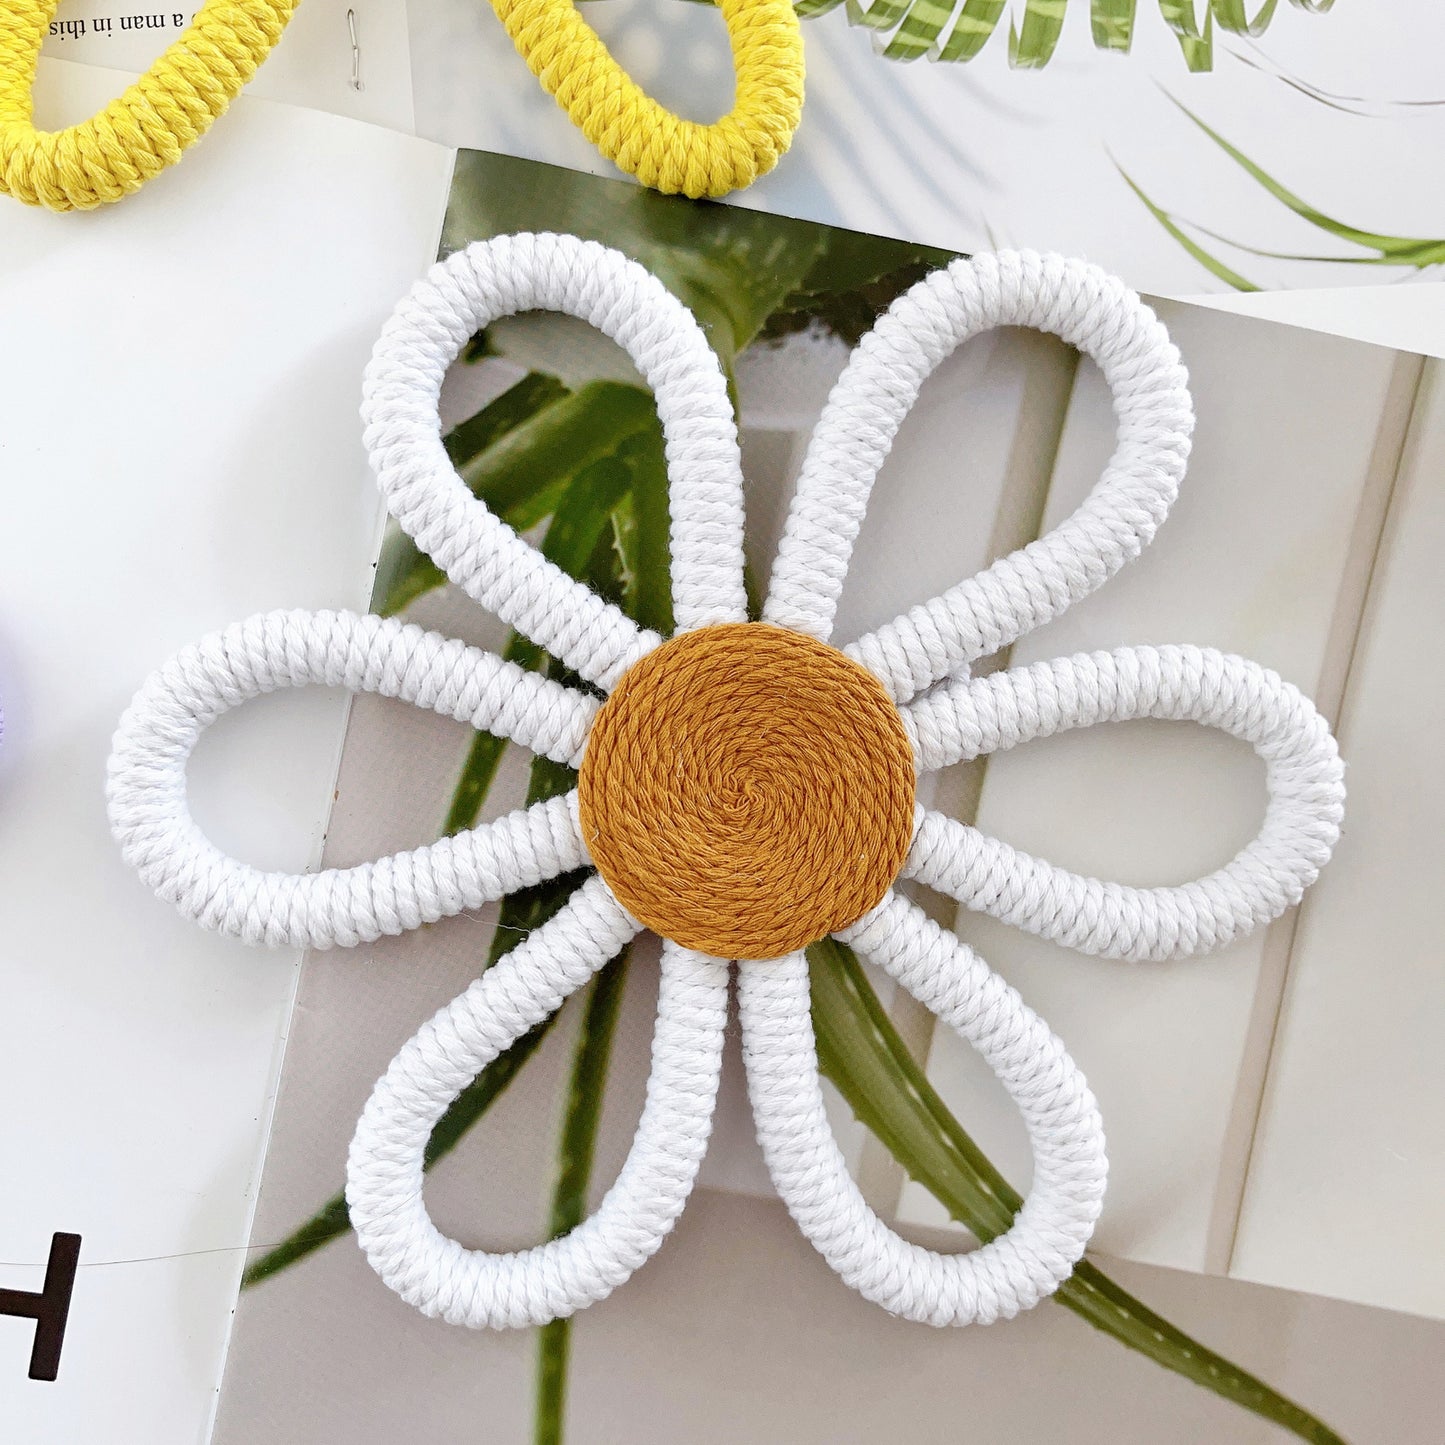 Daisy Flower Woven Wall Hanging: Adorable Nursery Decor for Girls, Infant and Children's Room Wall Decor - Handcrafted Floral Wall Art